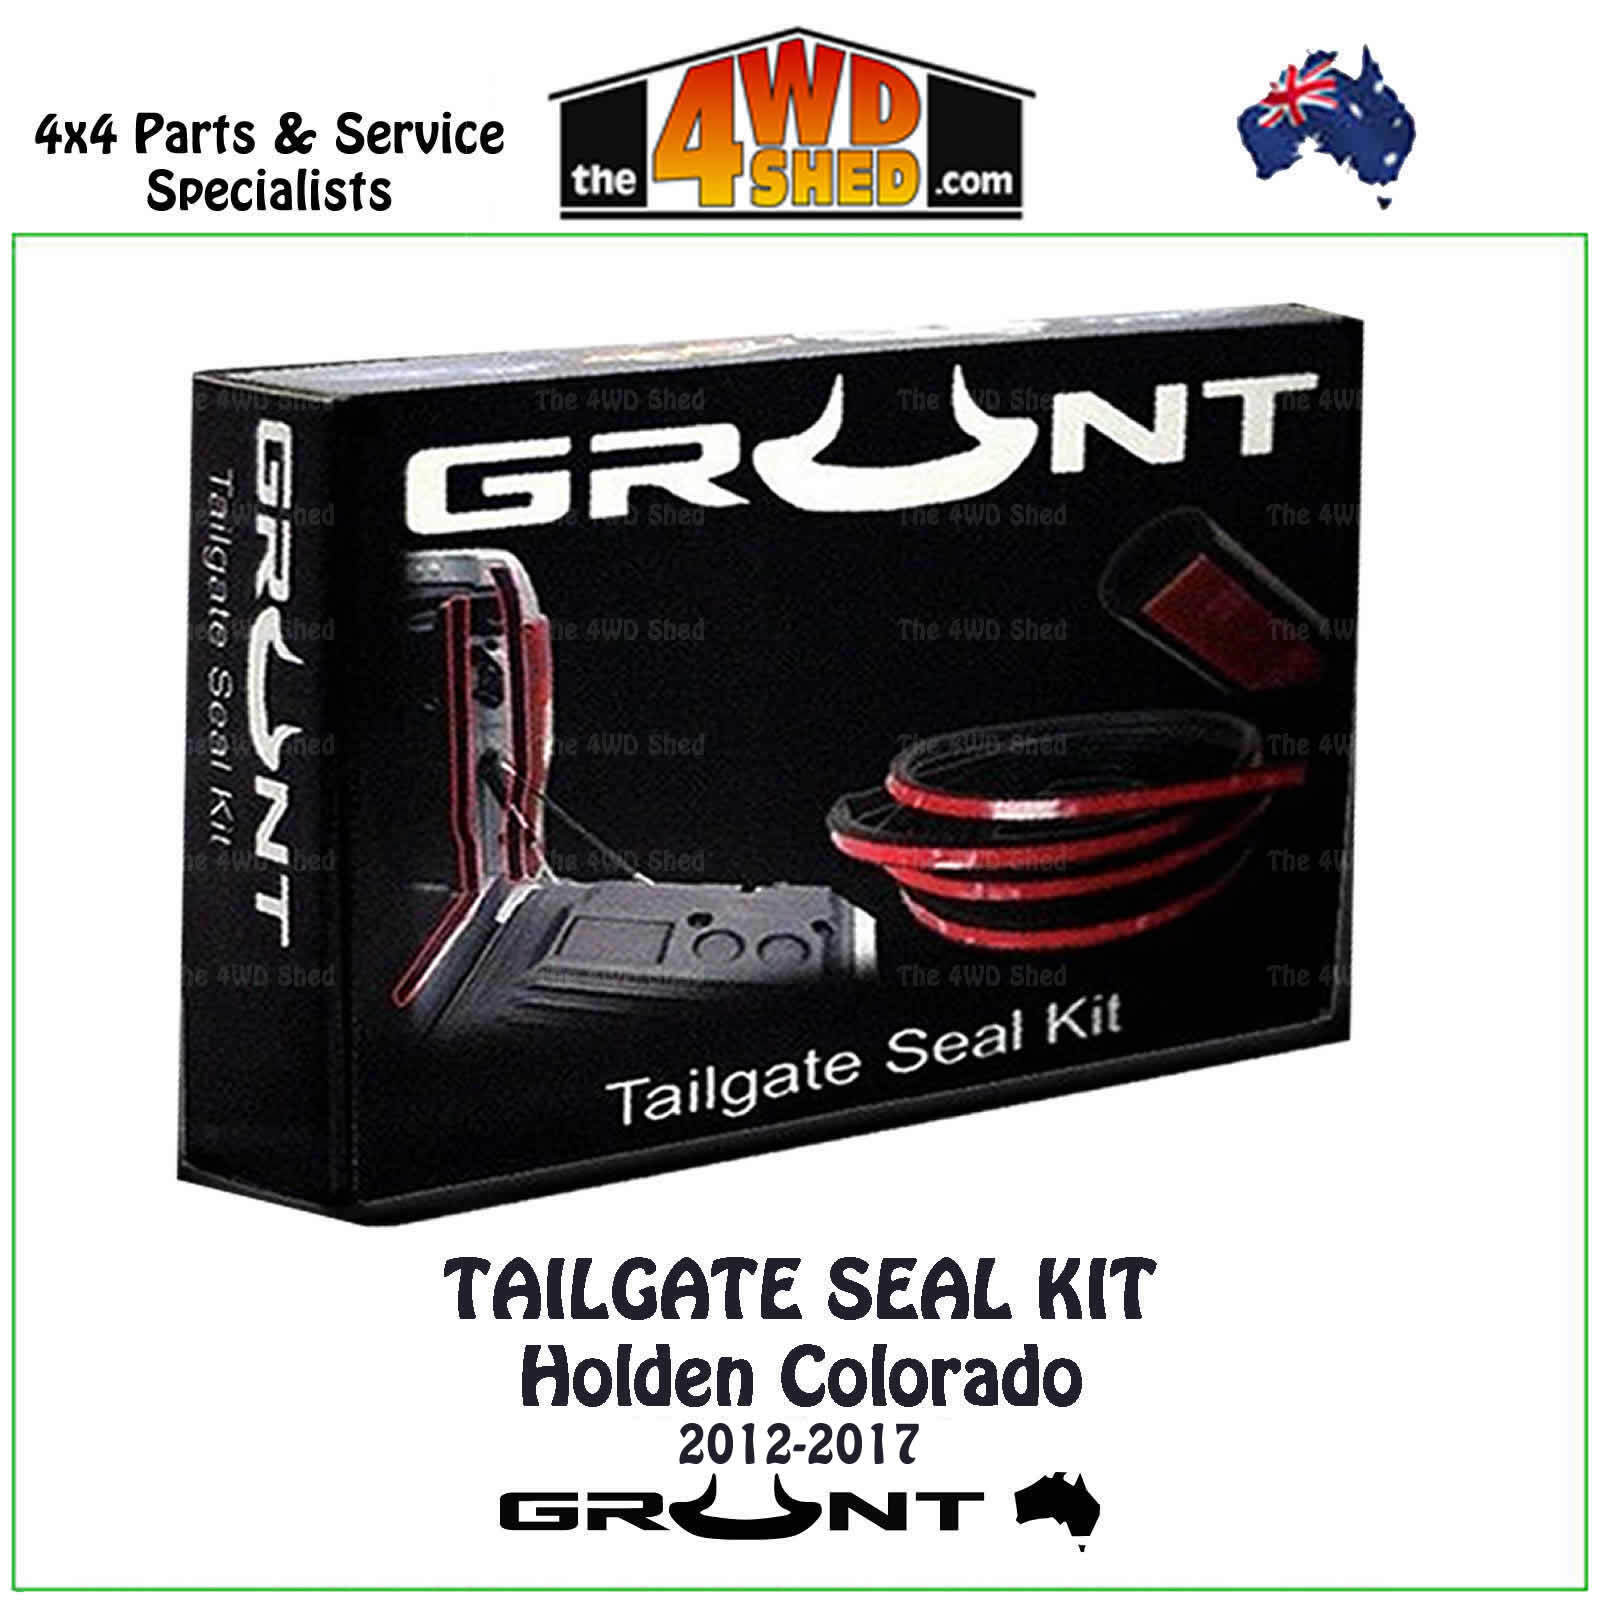 TAILGATE SEAL KIT FOR HOLDEN COLORADO RUBBER UTE DUST TAIL GATE MADE IN USA